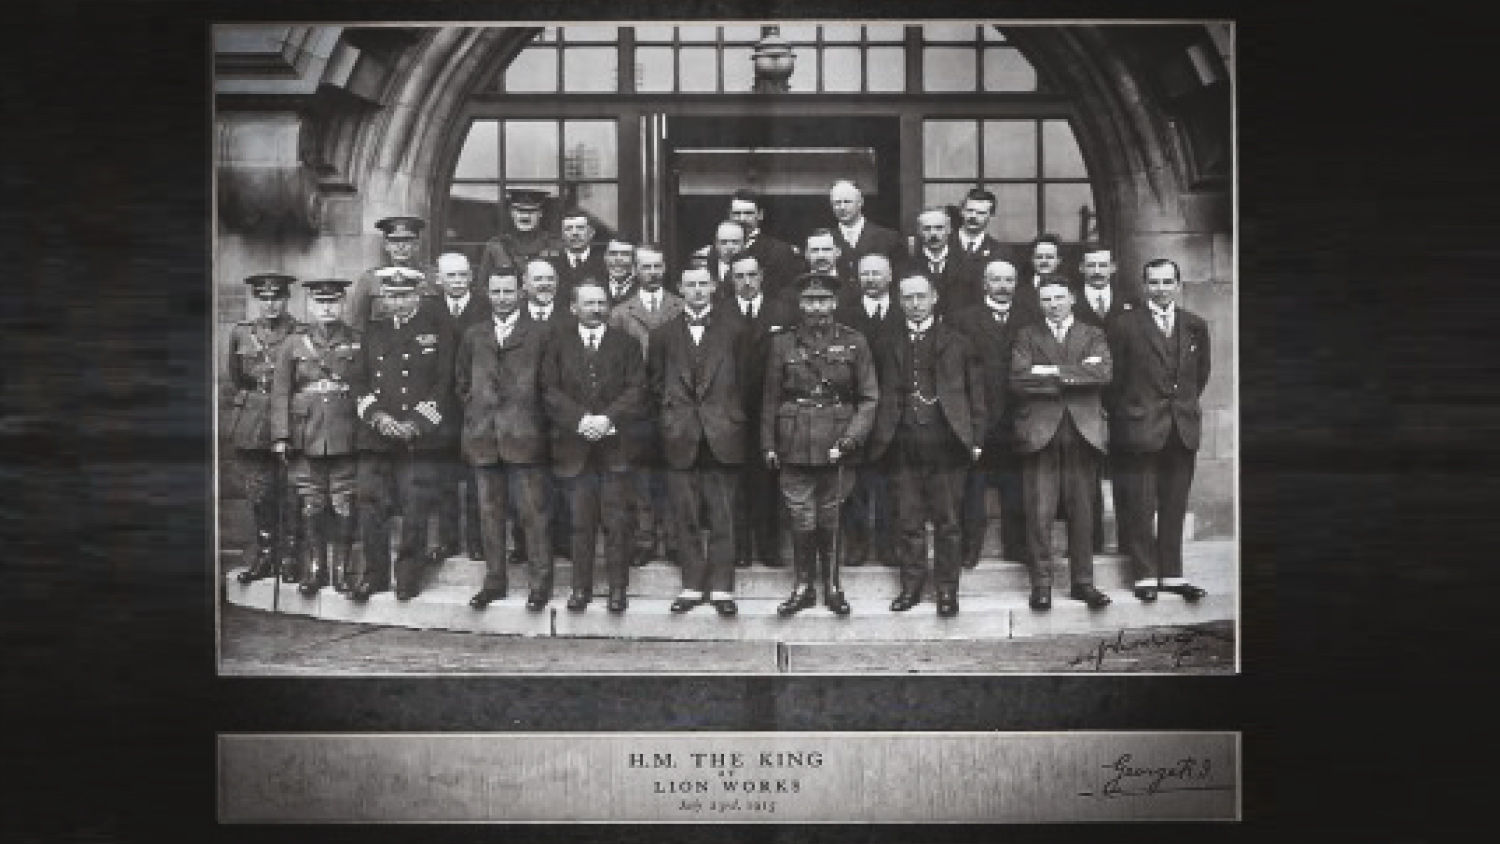 King George V visits the Eley factory in 1915